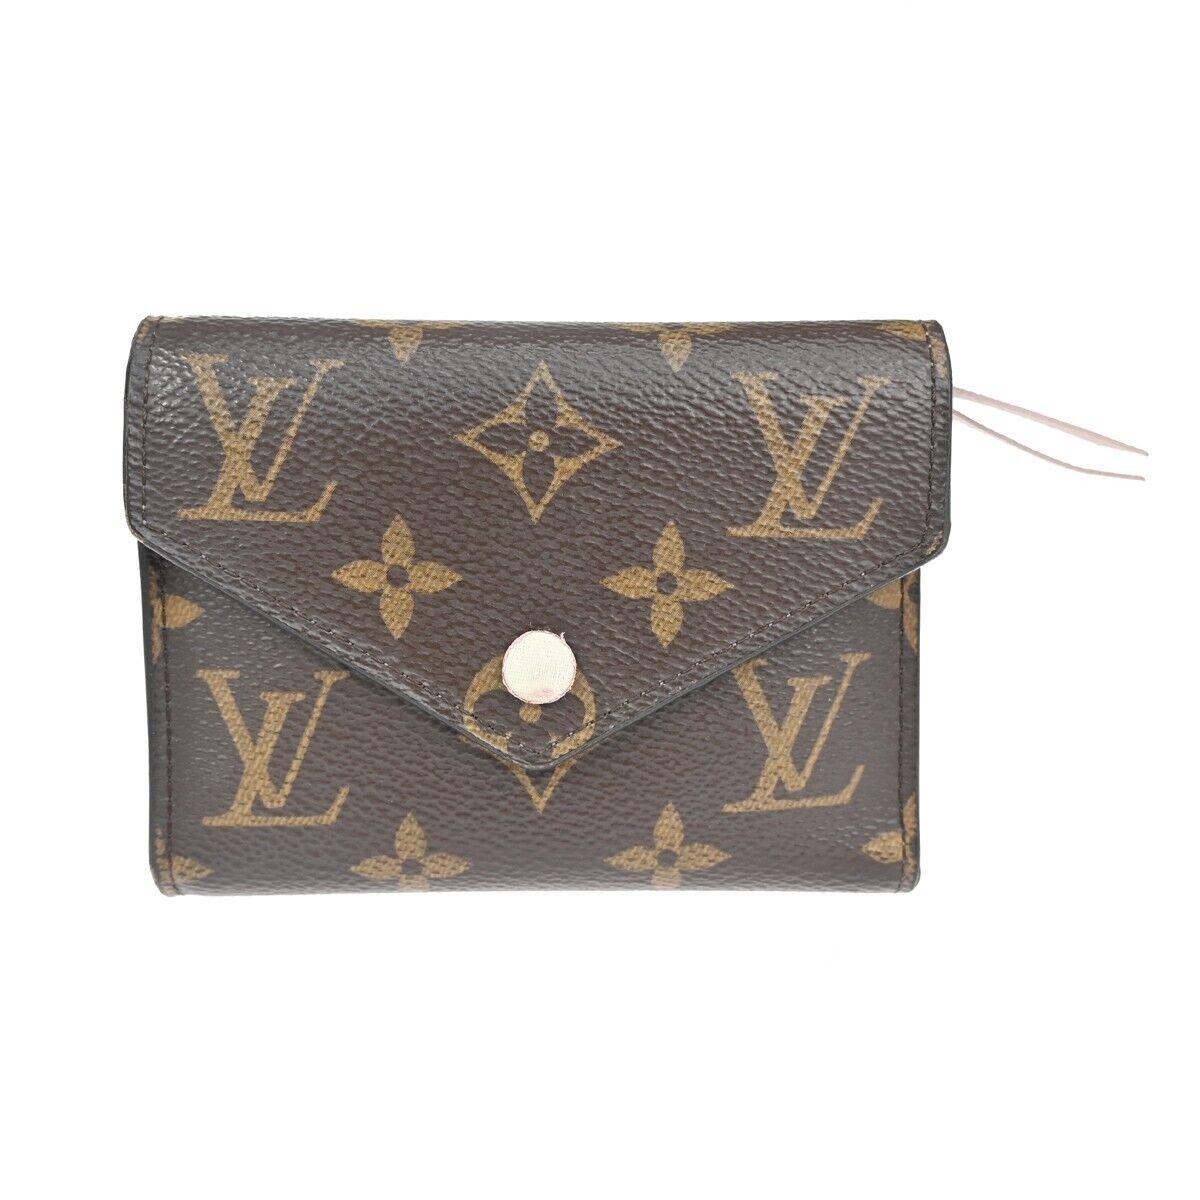 PRE-OWNED LOUIS VUITTON BROWN PORTEFEUILLE ELISE TRIFOLD PURSE